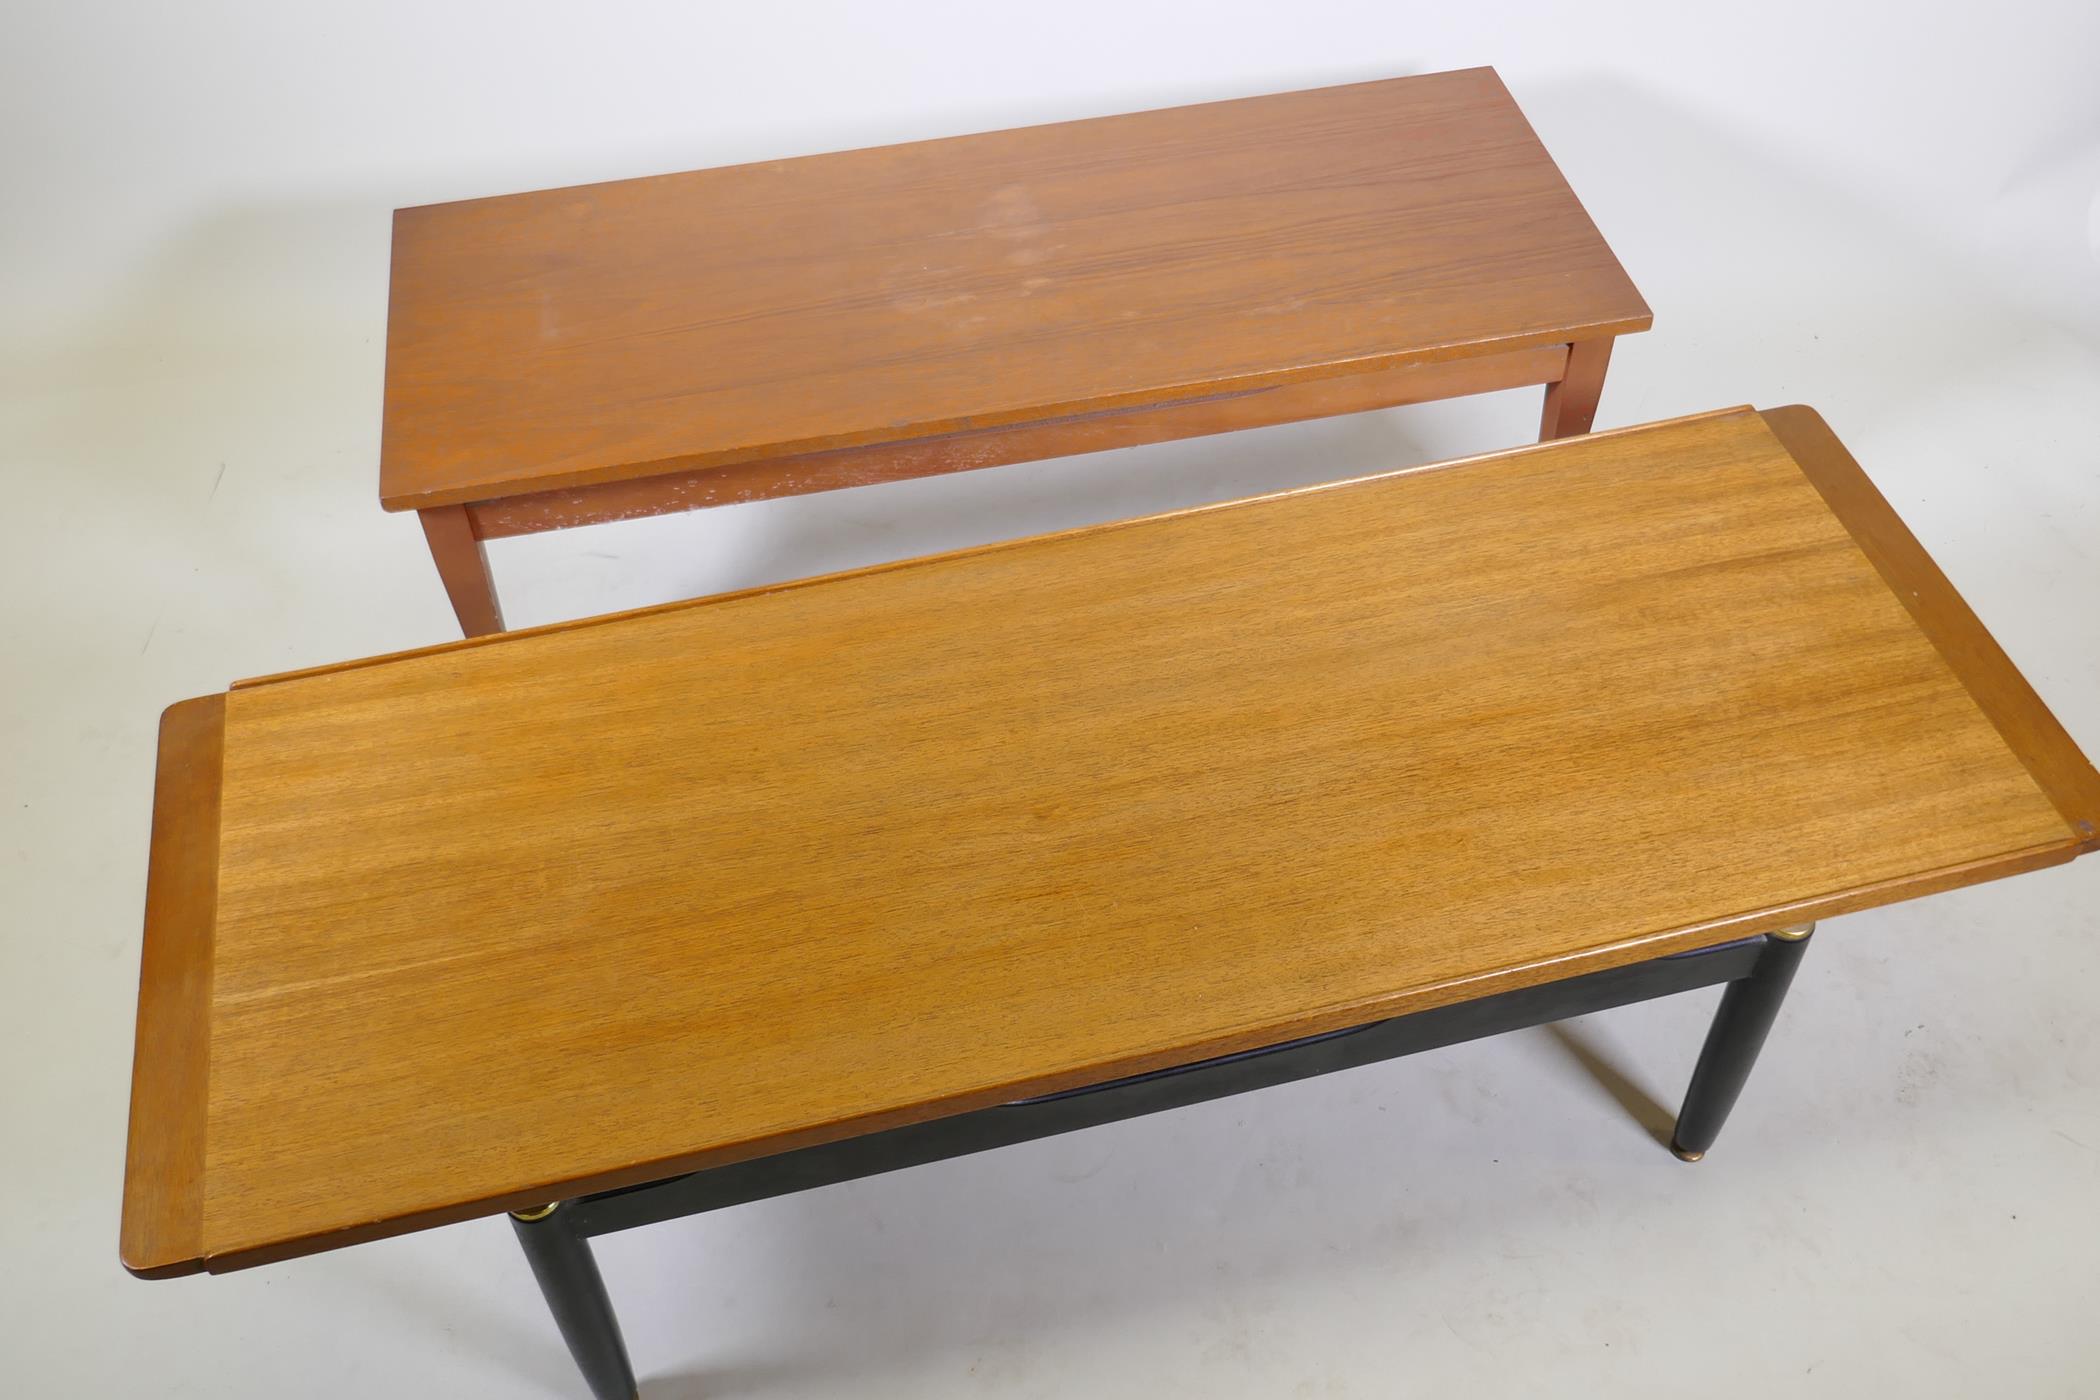 A G-Plan Librenza tola coffee table, 138 x 50 x 40cm, and a mid century teak top coffee table - Image 6 of 6